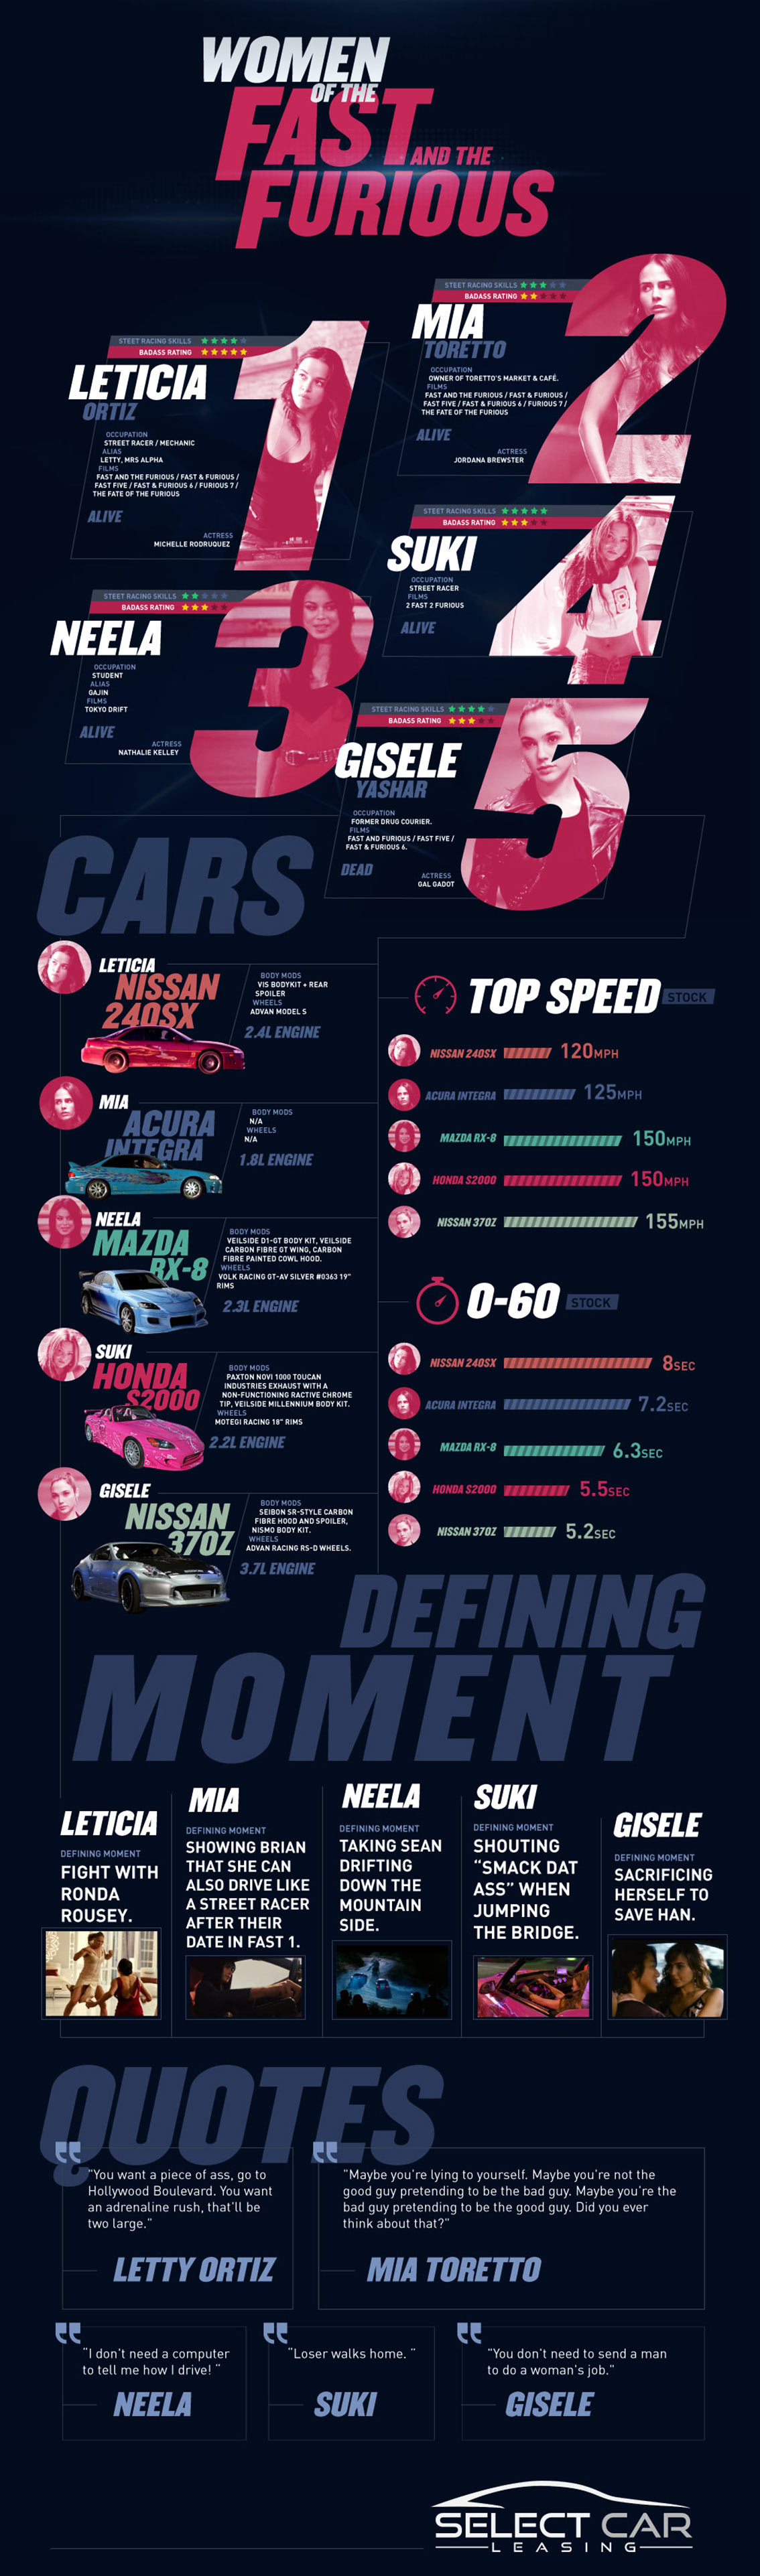 Female Casts of The Fast and the Furious - Movie Infographic